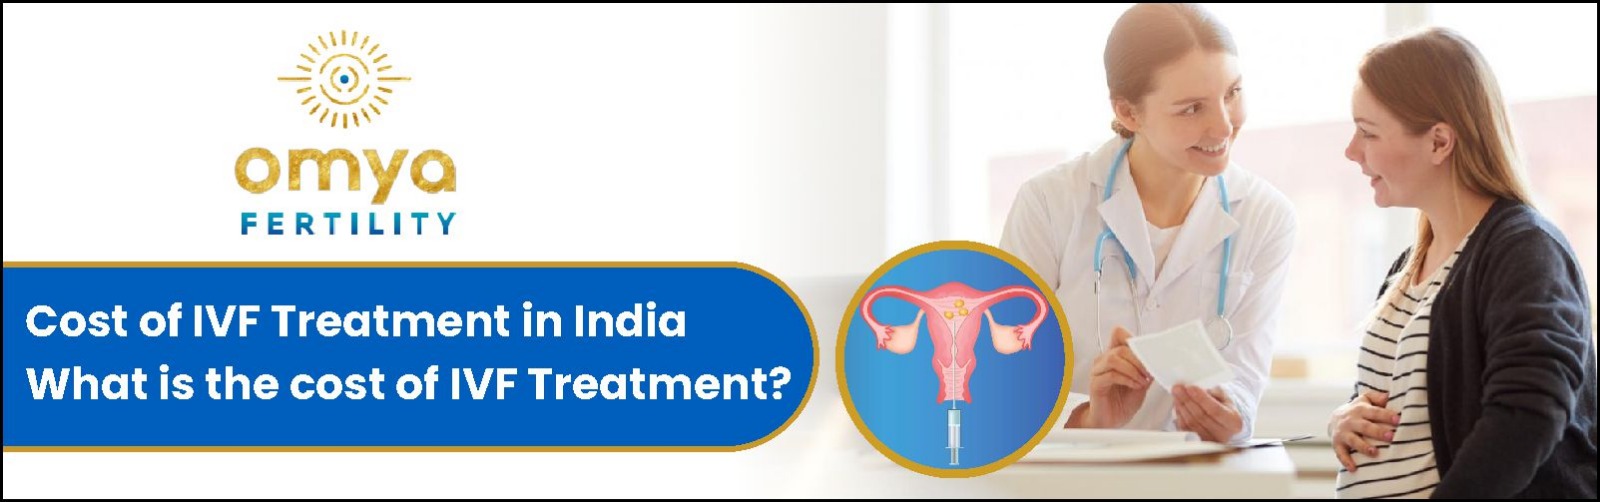 cost-of-ivf-treatment-in-india